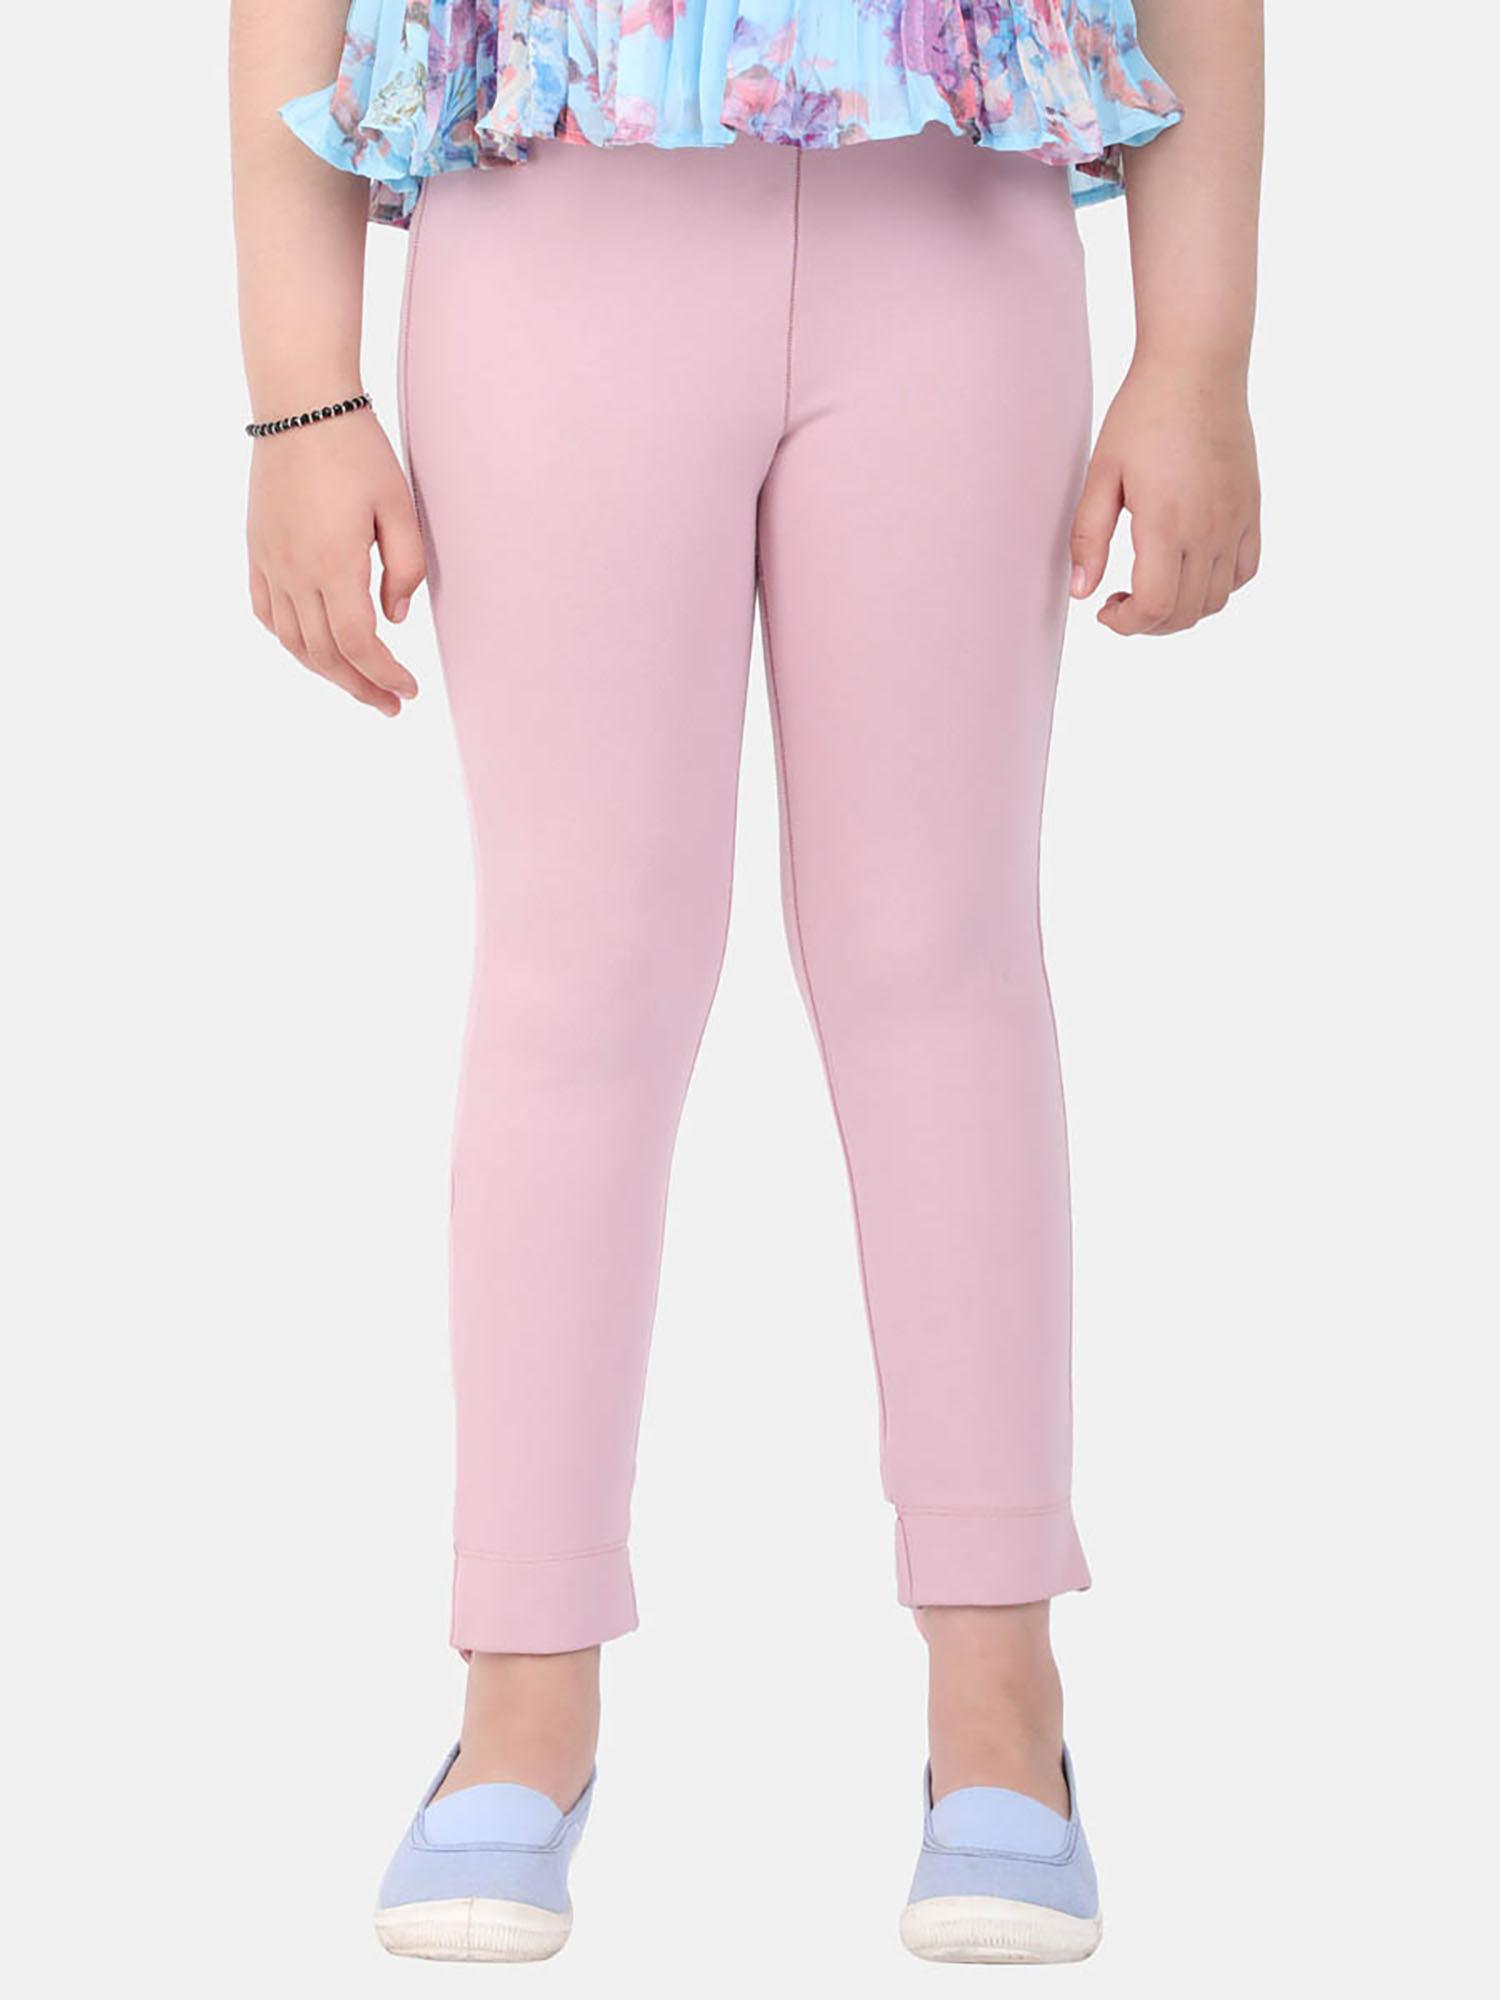 fashion casual girls cotton solid pink leggings